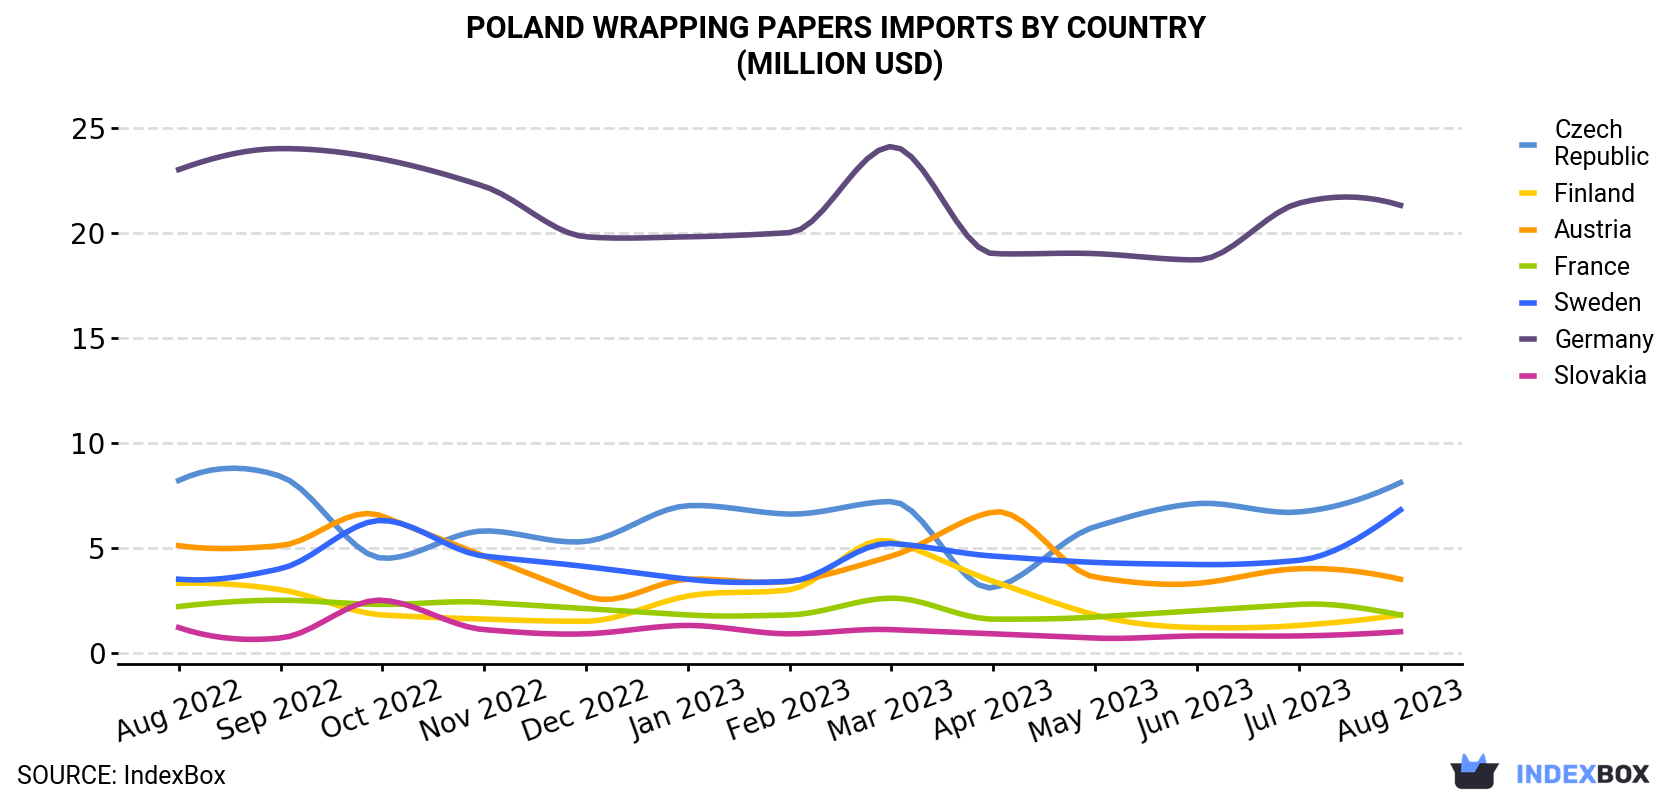 Poland Wrapping Papers Imports By Country (Million USD)